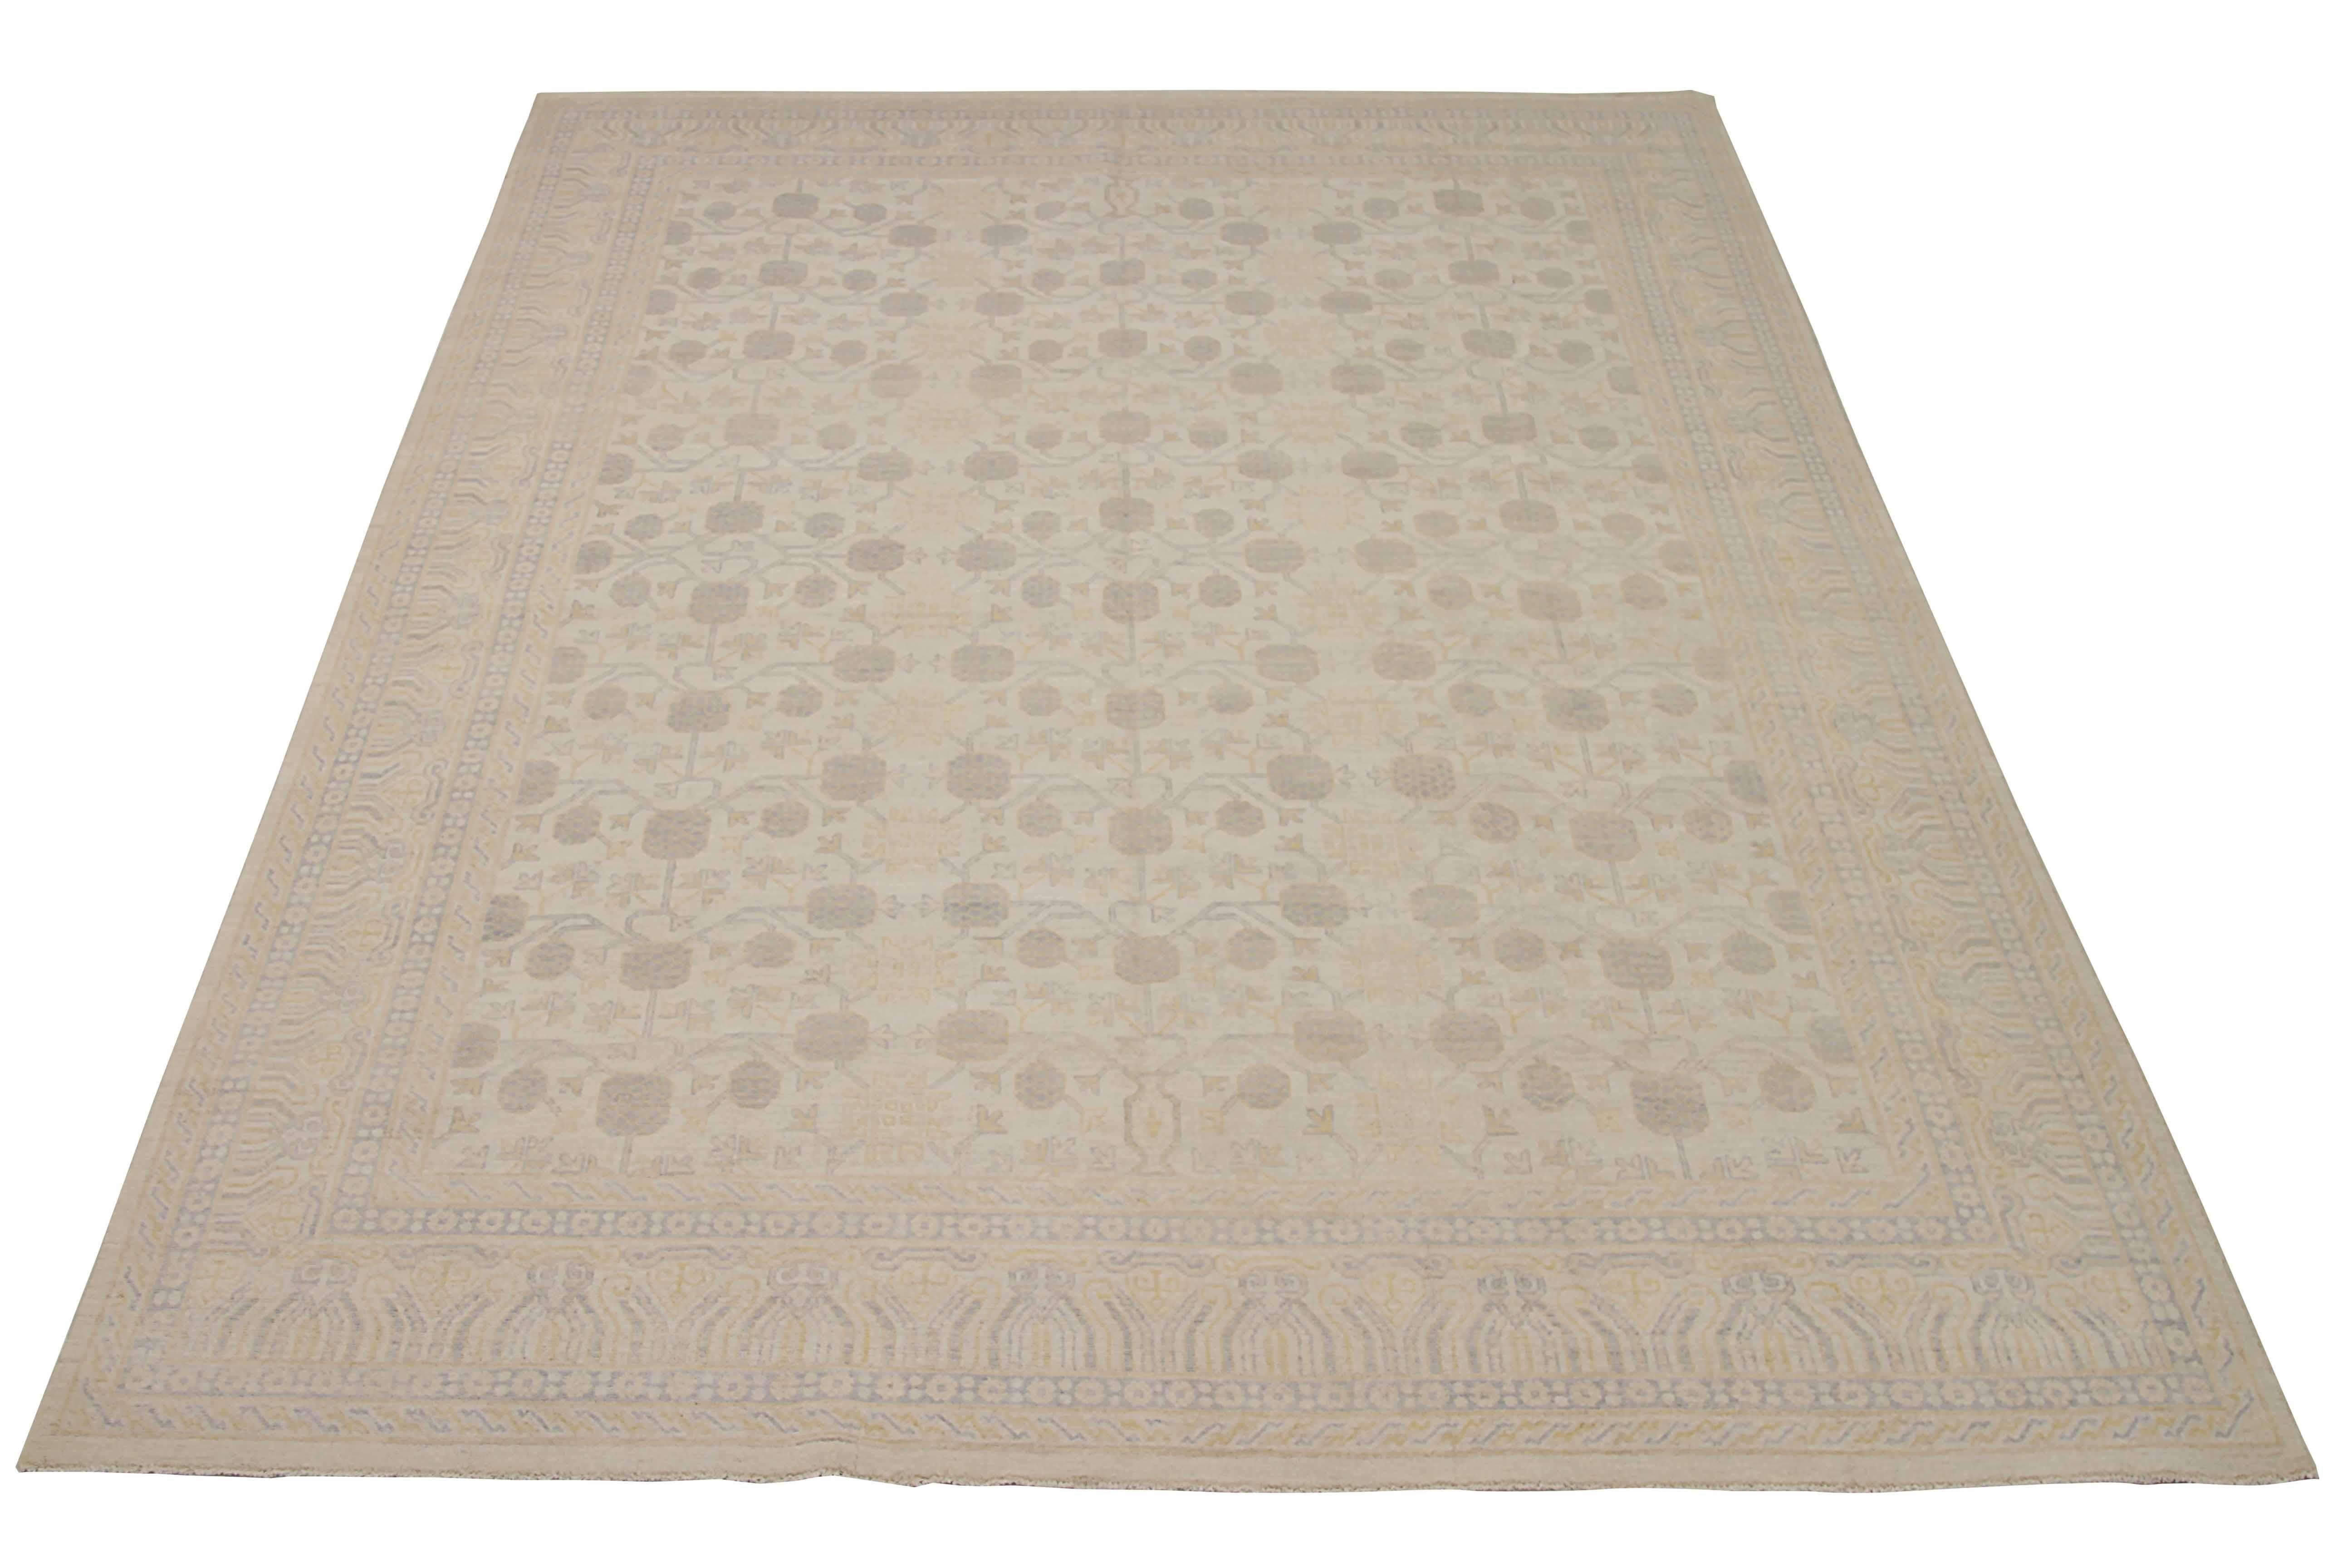 New Afghan area rug handwoven from the finest sheep’s wool. It’s colored with all-natural vegetable dyes that are safe for humans and pets. It’s a traditional Khotan design woven by expert artisans. In addition to the fine weaving, this rug